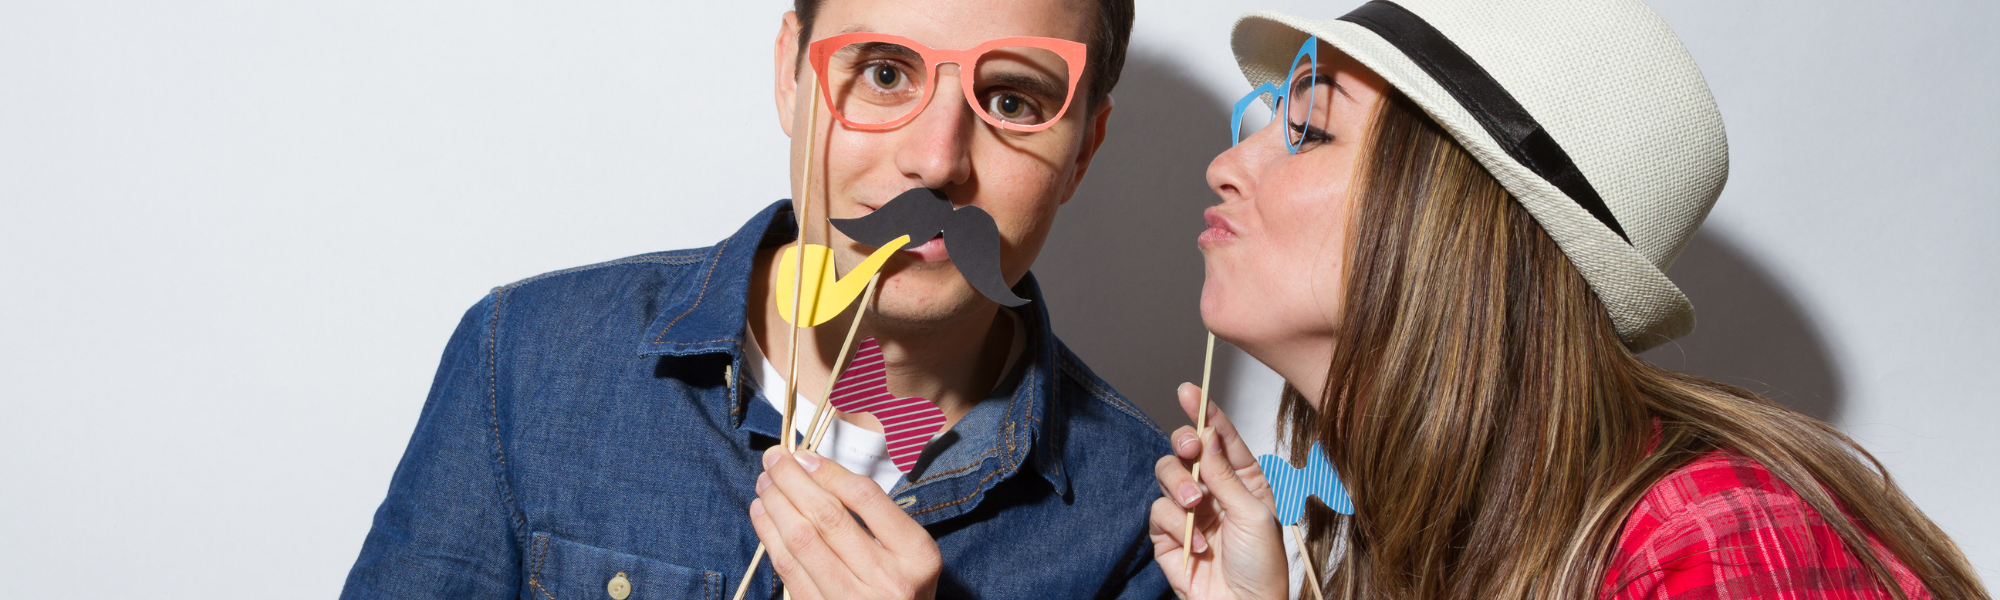 photo booth session with couple using props 